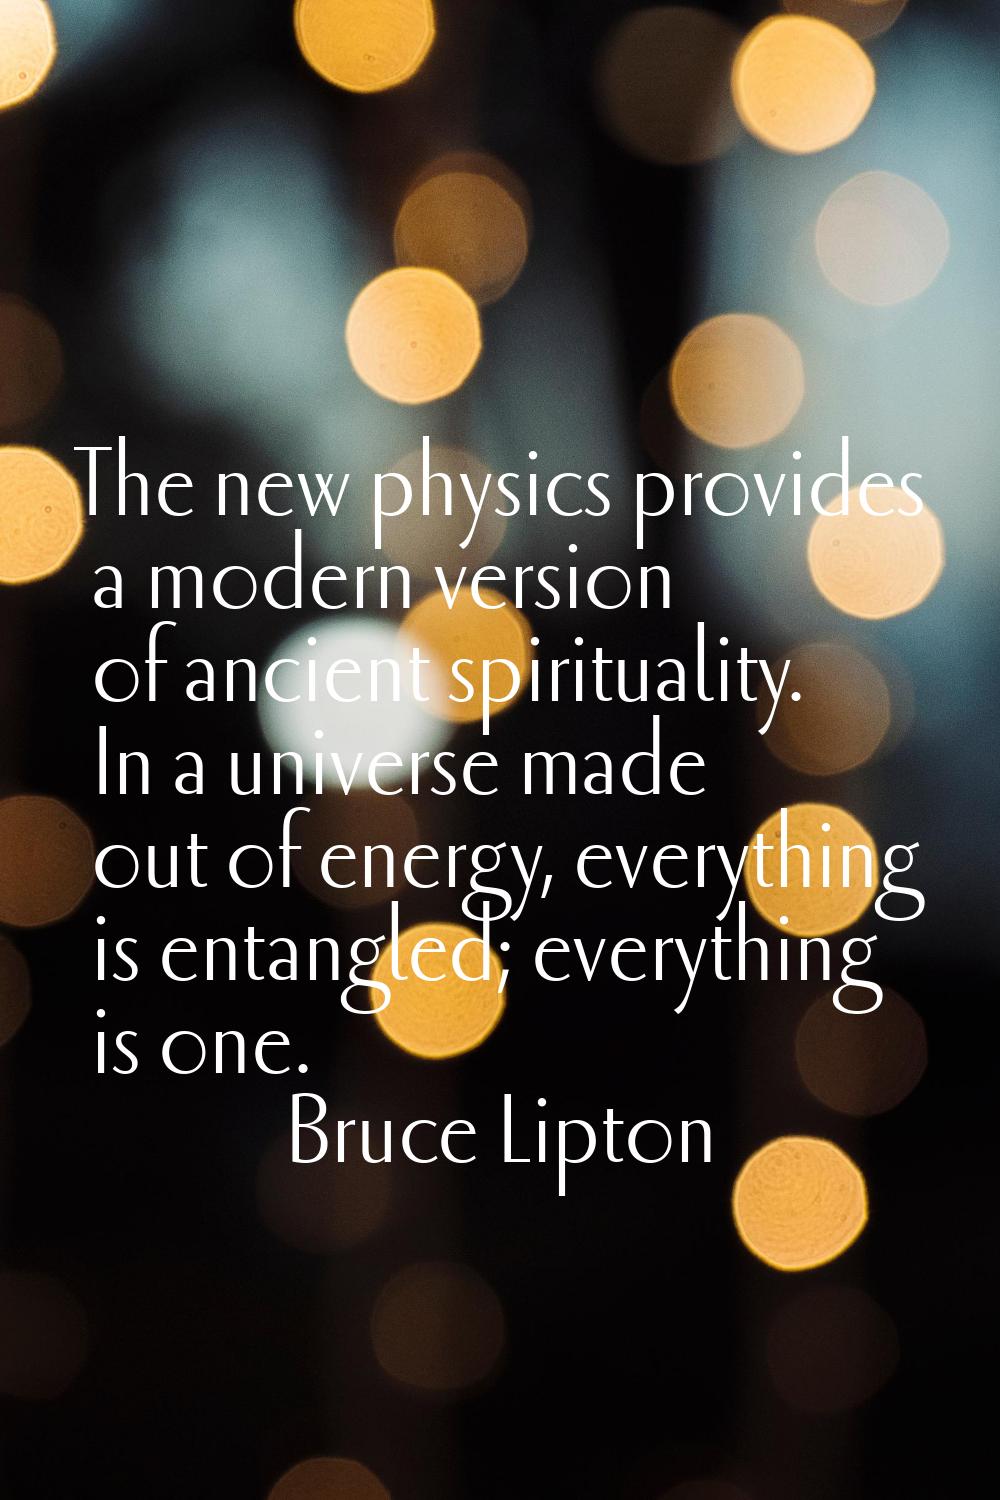 The new physics provides a modern version of ancient spirituality. In a universe made out of energy